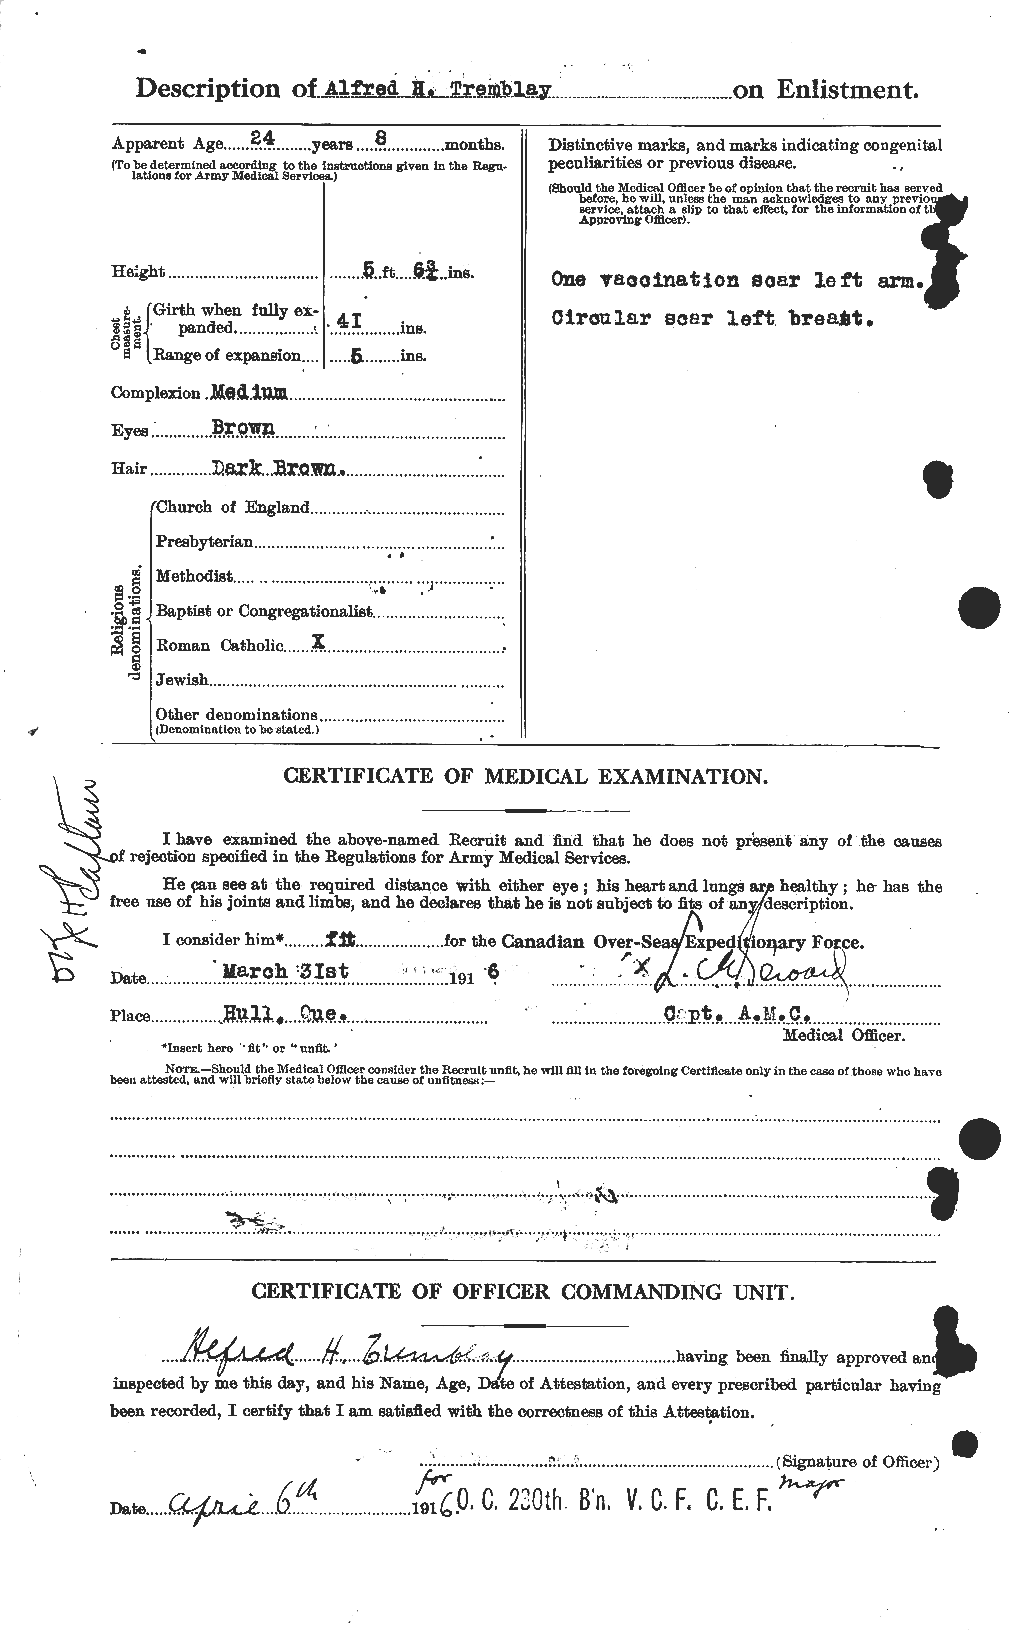 Personnel Records of the First World War - CEF 638926b